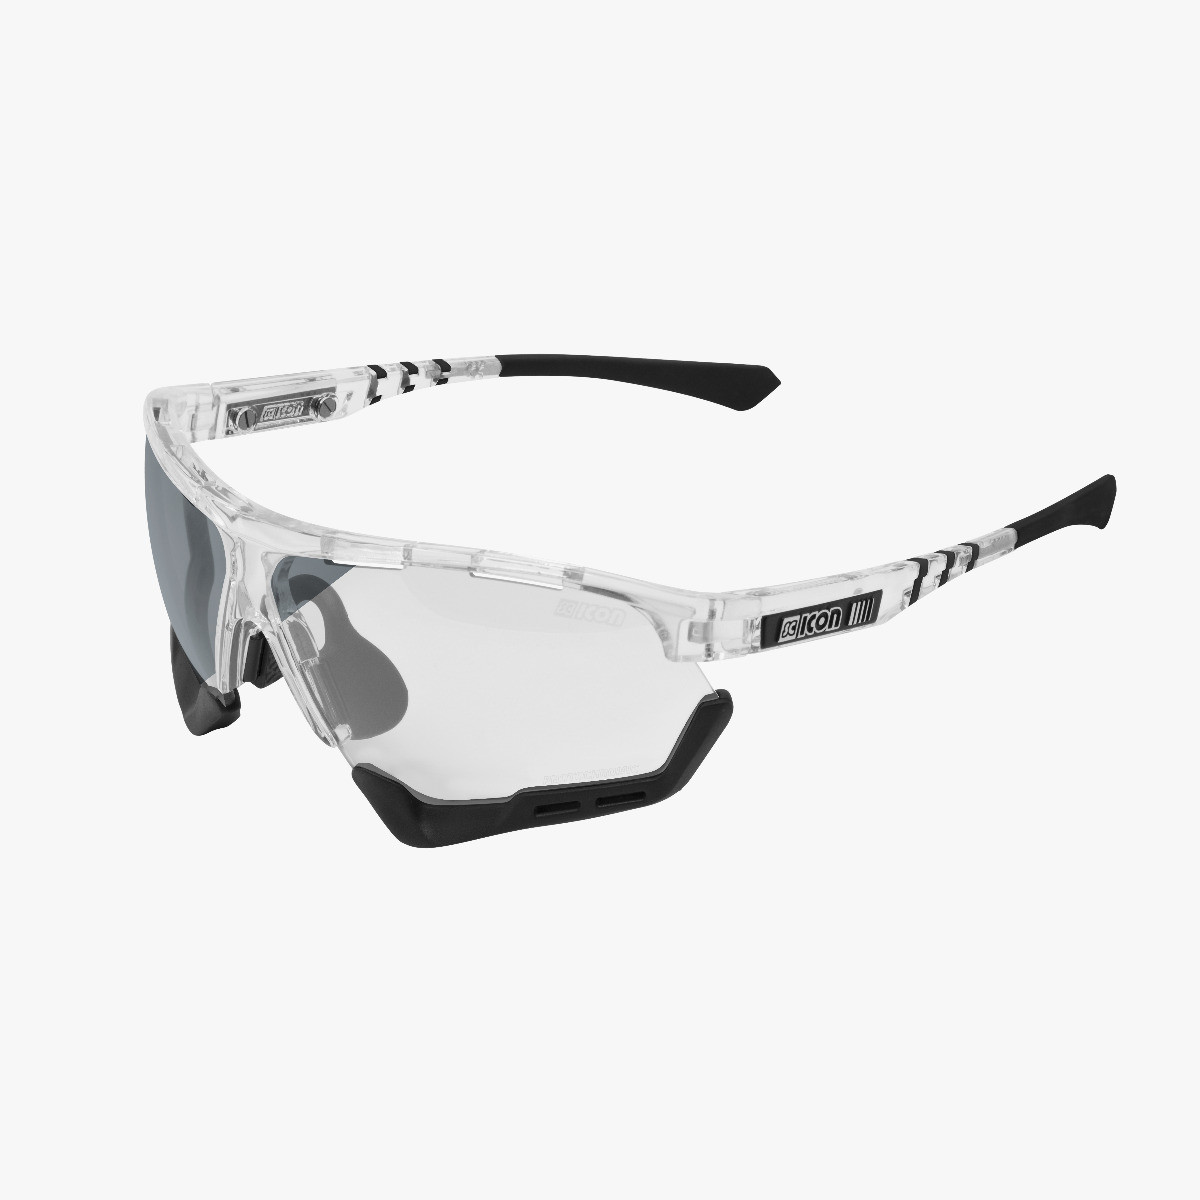 Scicon Sports | Aerocomfort Sport Cycling Performance Sunglasses - Crystal Gloss / Photocromatic Silver - EY15180705
